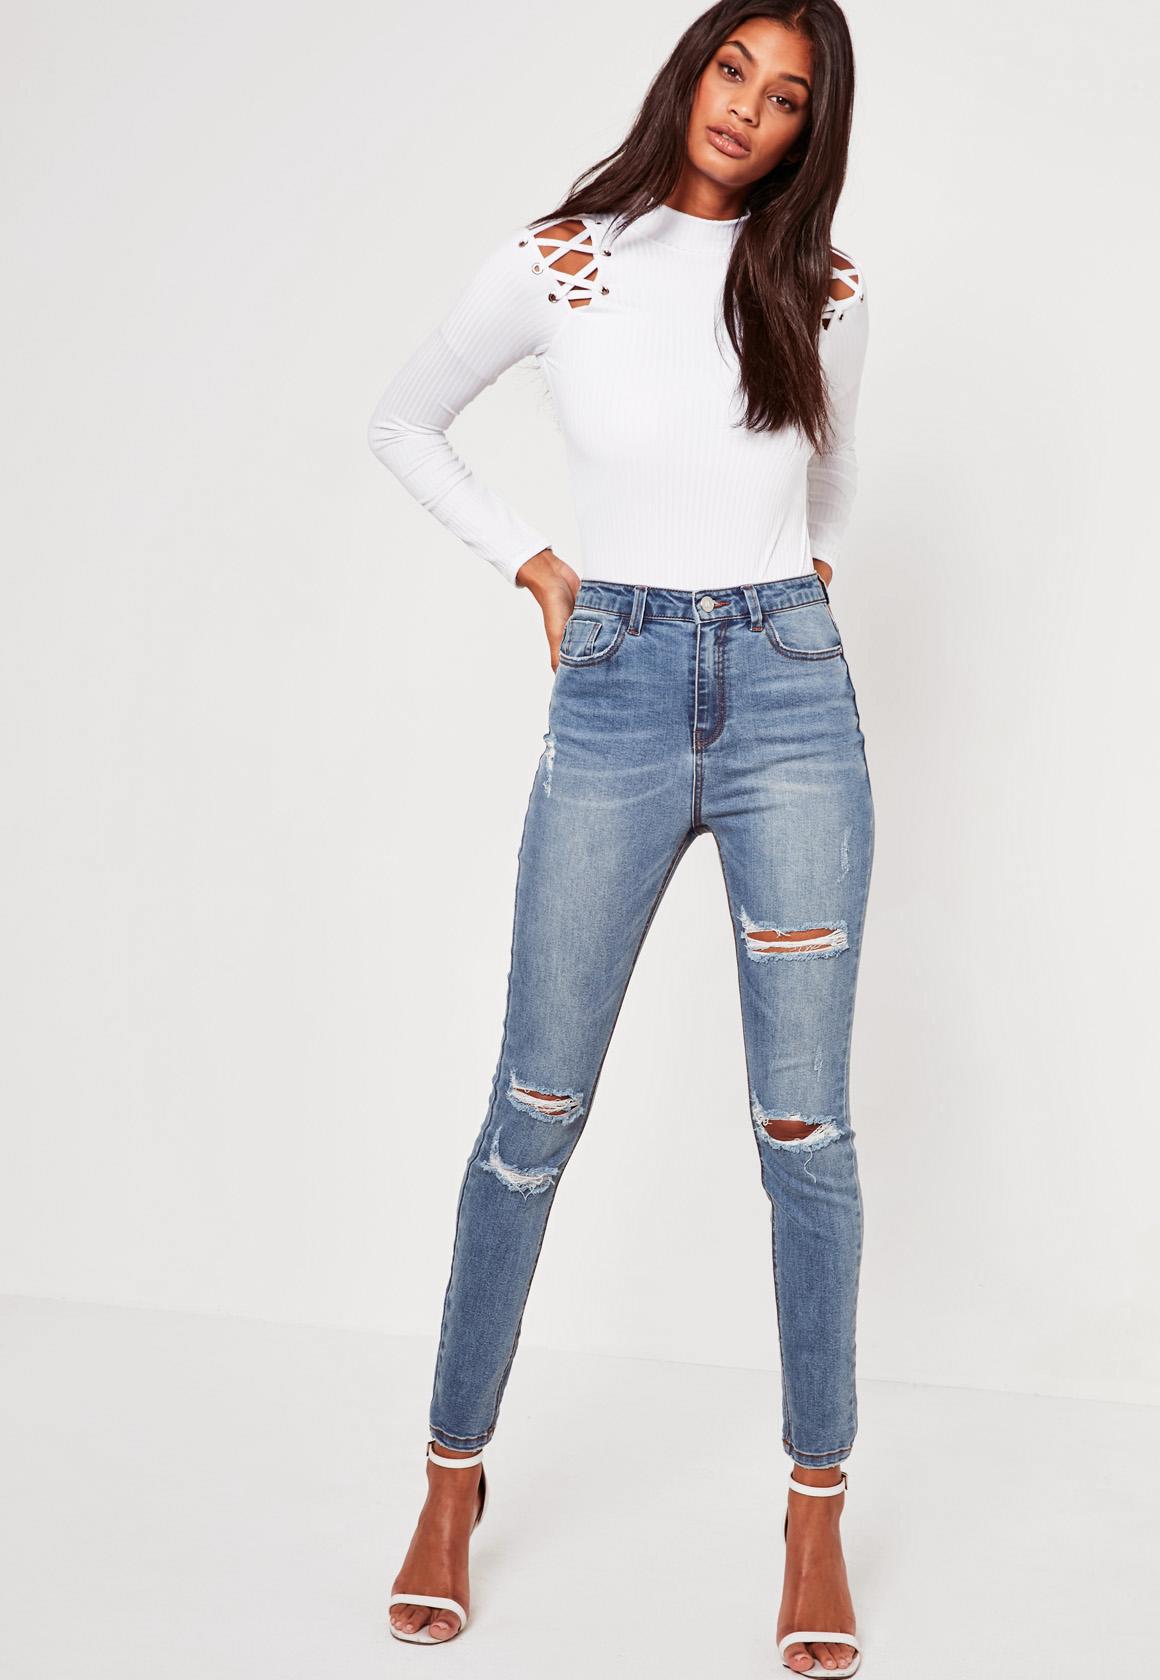 Blue Sinner High Waisted Ripped Skinny Jeans | Missguided